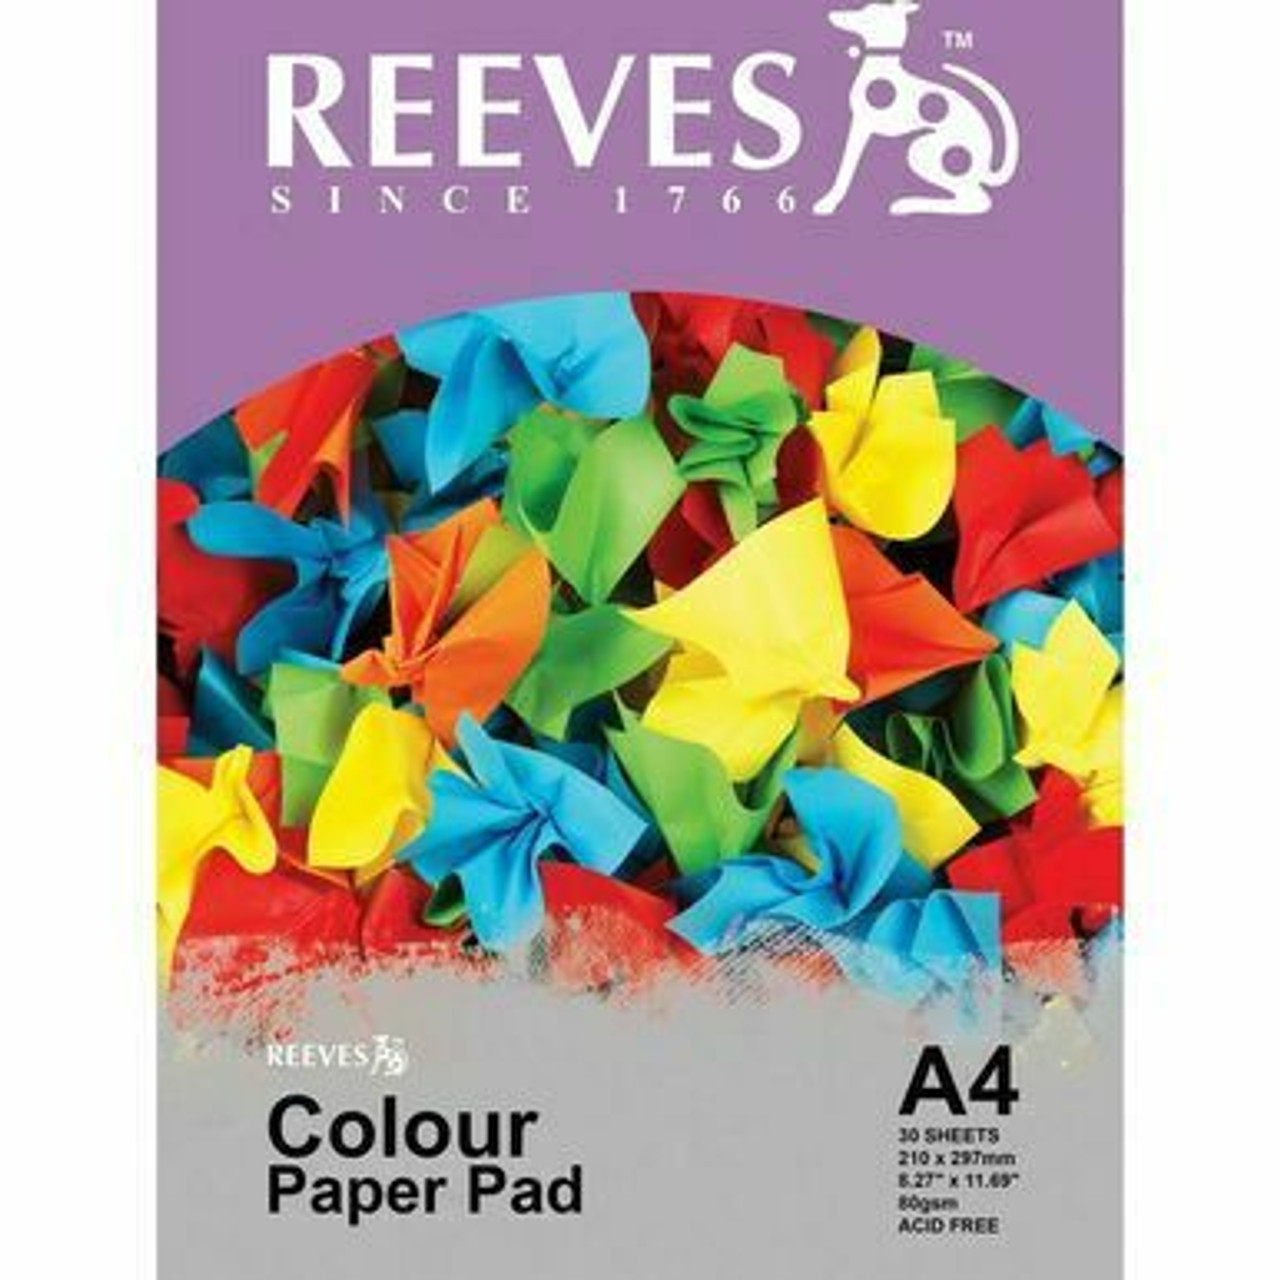 Reeves Colour Paper Pad A5